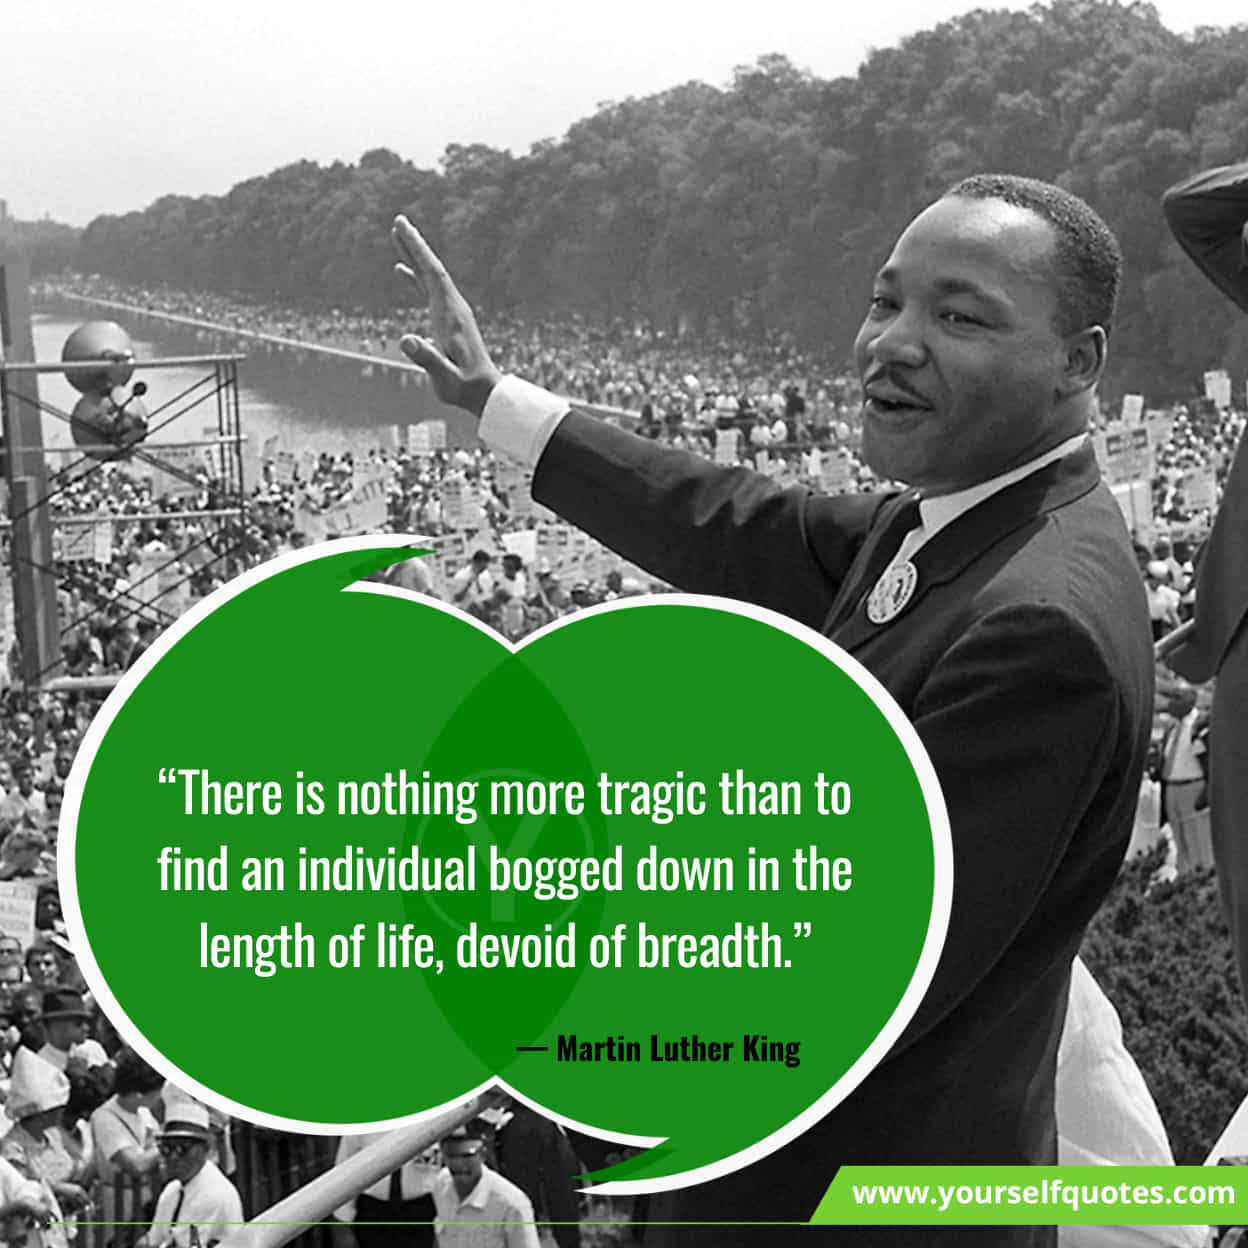 Martin Luther King, Jr. Quotes On Peace